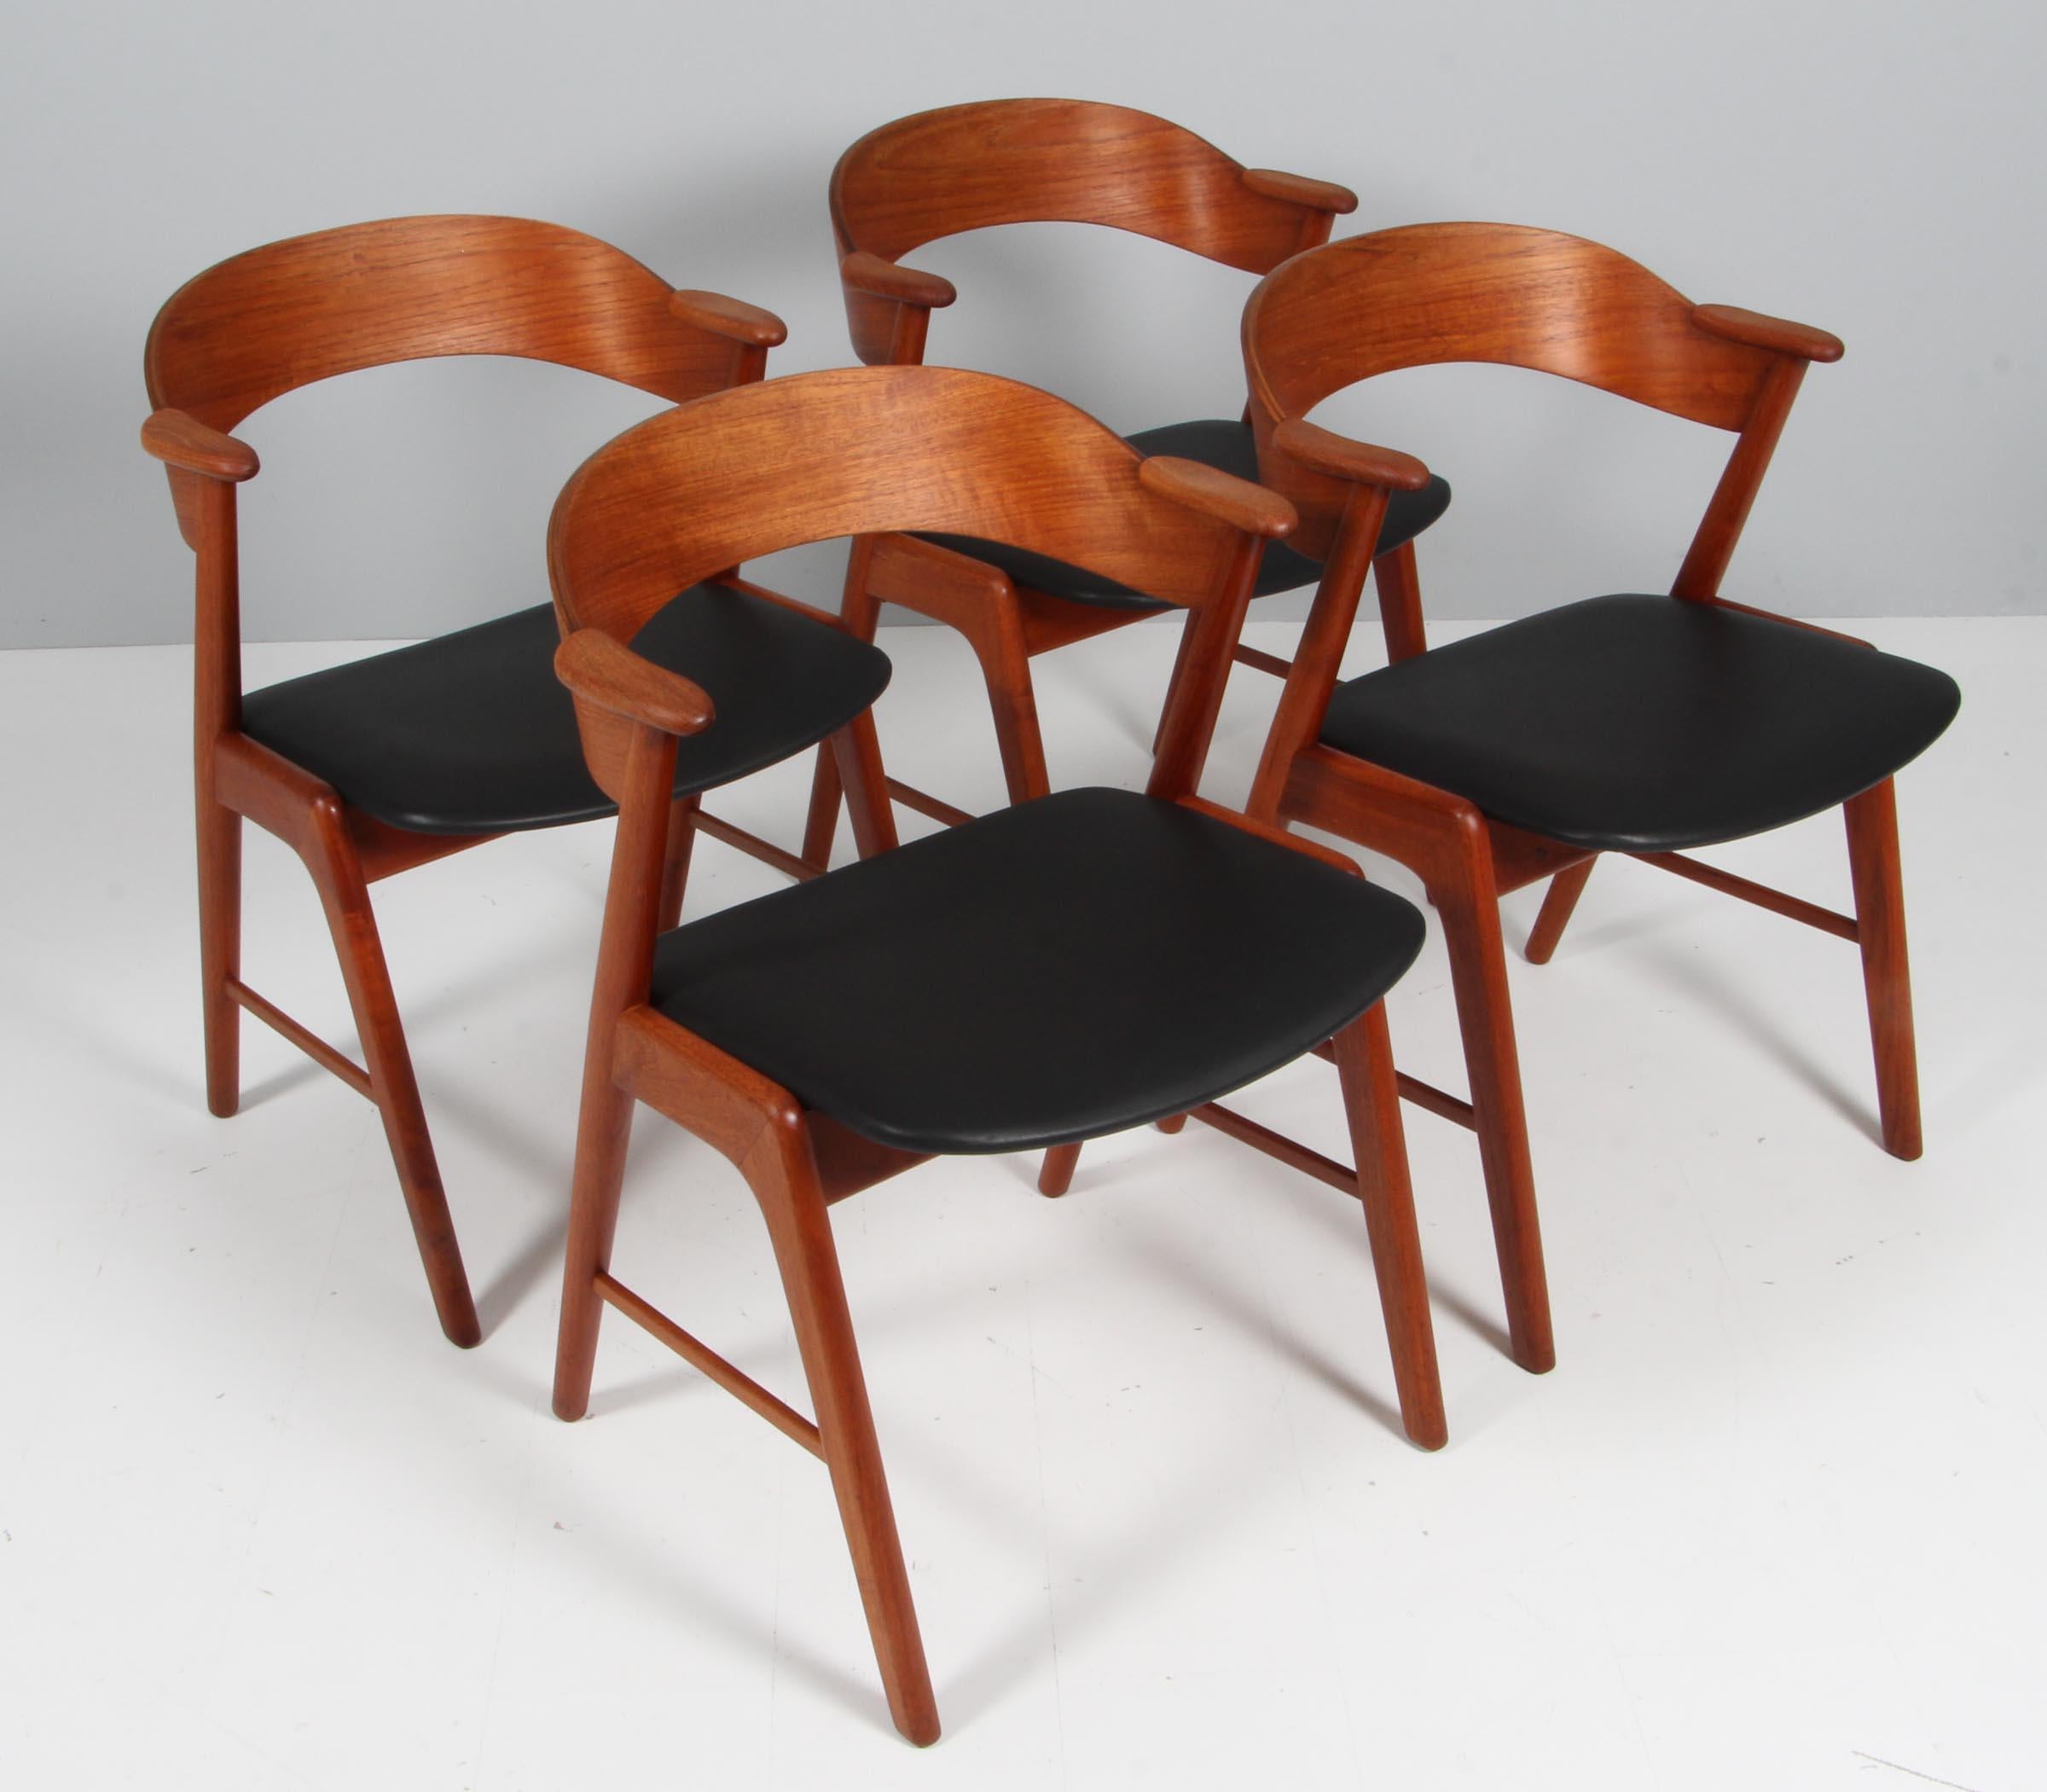 Kai Kristiansen for KS Møbler, set of 6 dining chairs, teak , black aniline leather, Denmark, 1950s. 

The chairs show beautiful and well designed lines and joints. The curved back and armrests are mounted on the oblique rear legs, which provides